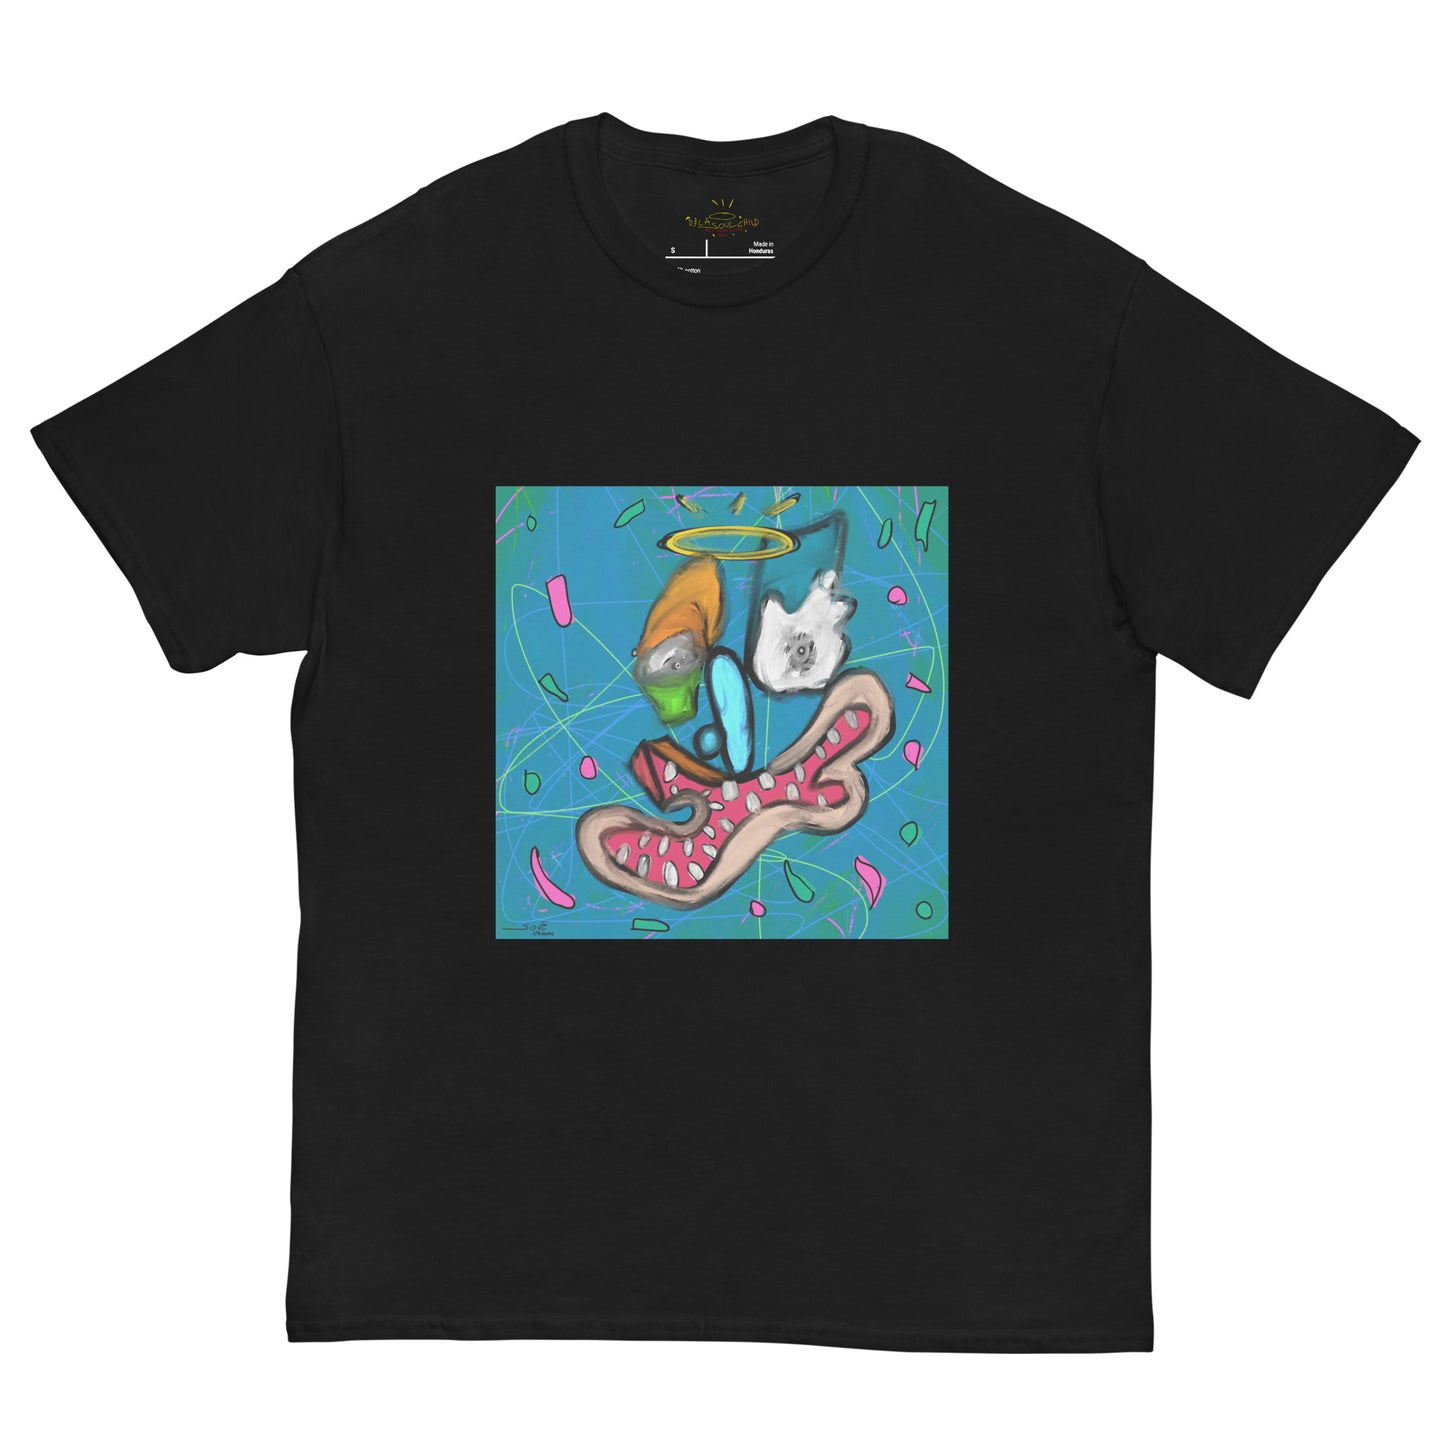 ZOOKIES #11 - Collectible T-Shirt - Based off the original 1/1 Solana NFT Print - *FREE-SHIPPING ON ME FOR A LIMITED TIME*